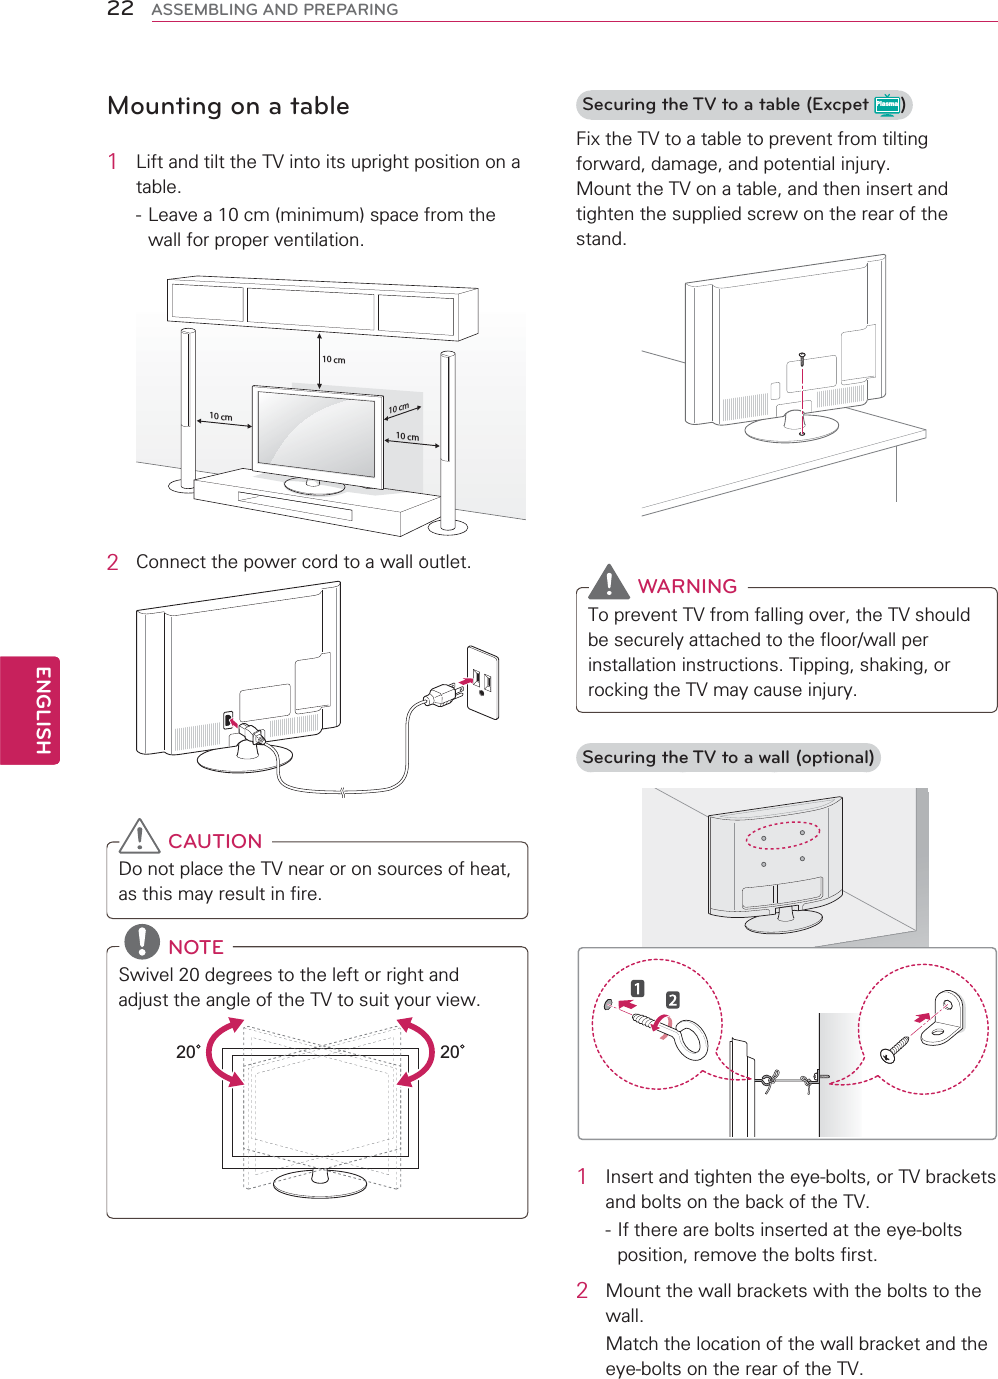 22ENGENGLISHASSEMBLING AND PREPARINGMounting on a table1  Lift and tilt the TV into its upright position on a table. - Leave a 10 cm (minimum) space from the wall for proper ventilation.10 cm10 cm10 cm10 cm2  Connect the power cord to a wall outlet. CAUTIONDo not place the TV near or on sources of heat, as this may result in fire. NOTESwivel 20 degrees to the left or right and adjust the angle of the TV to suit your view. 2020Securing the TV to a table (Excpet Plasma)Fix the TV to a table to prevent from tilting forward, damage, and potential injury.Mount the TV on a table, and then insert and tighten the supplied screw on the rear of the stand.  WARNINGTo prevent TV from falling over, the TV should be securely attached to the floor/wall per installation instructions. Tipping, shaking, or rocking the TV may cause injury.Securing the TV to a wall (optional)1  Insert and tighten the eye-bolts, or TV brackets and bolts on the back of the TV.- If there are bolts inserted at the eye-bolts position, remove the bolts first.2  Mount the wall brackets with the bolts to the wall.Match the location of the wall bracket and the eye-bolts on the rear of the TV.